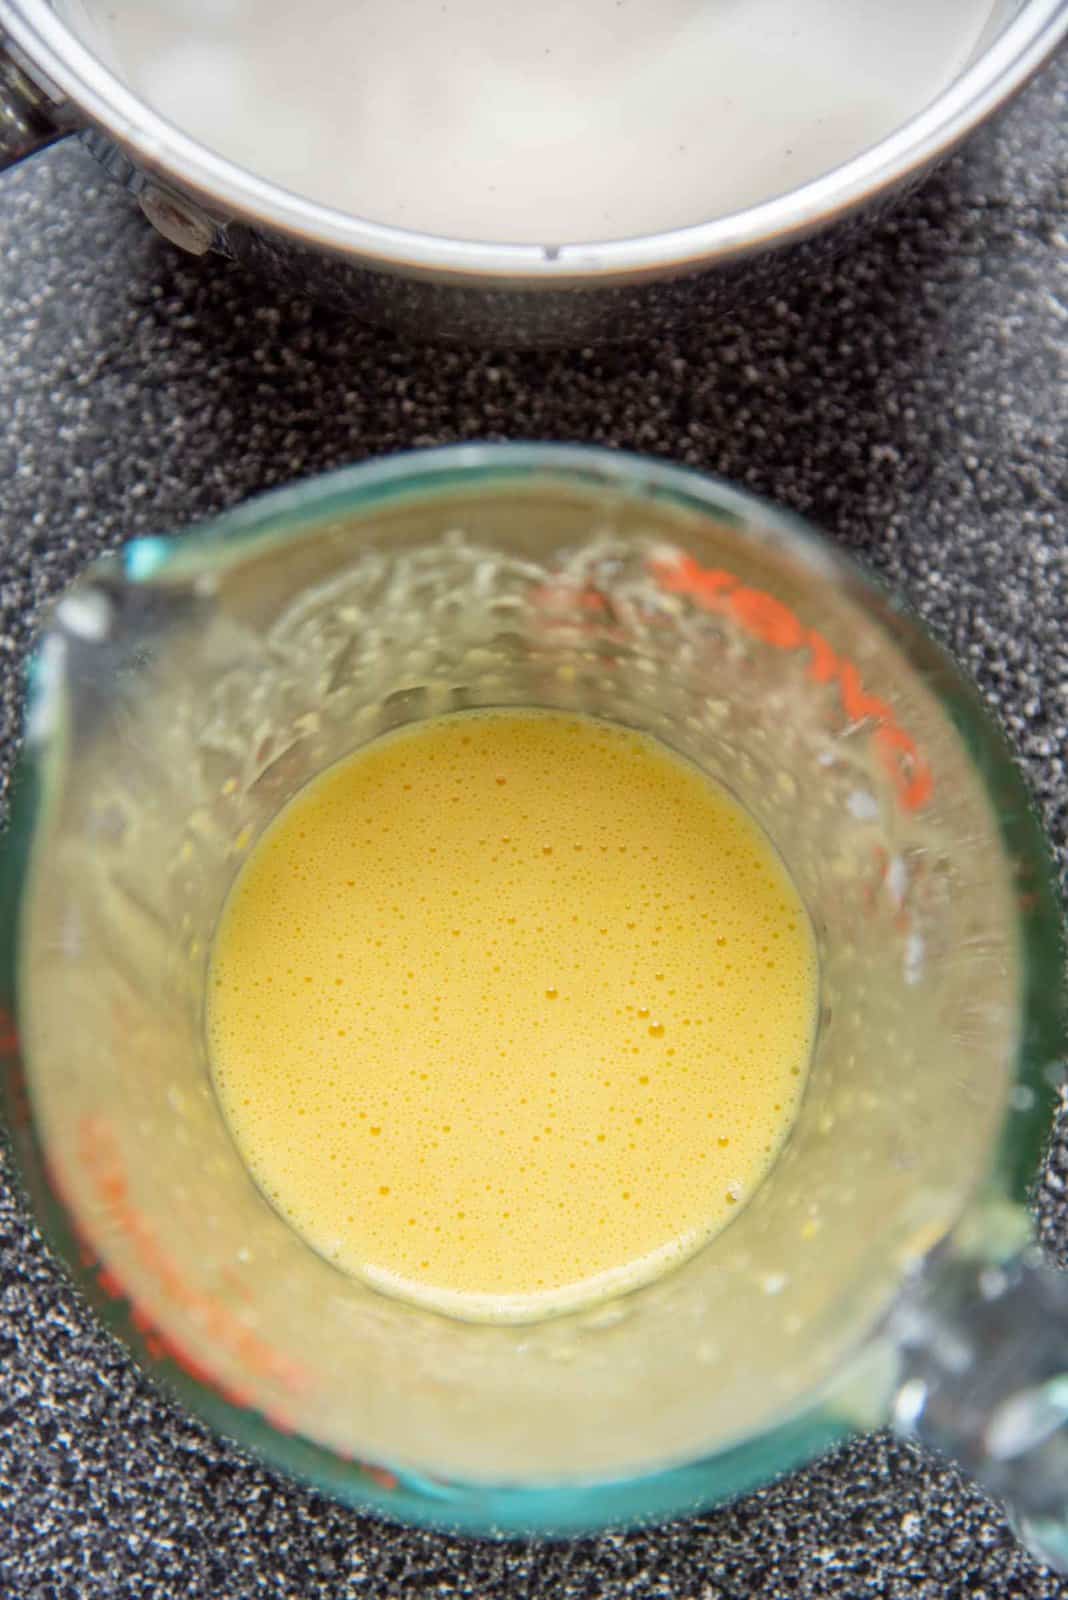 The egg yolks, cornstarch and milk whisked together until smooth in a jug.